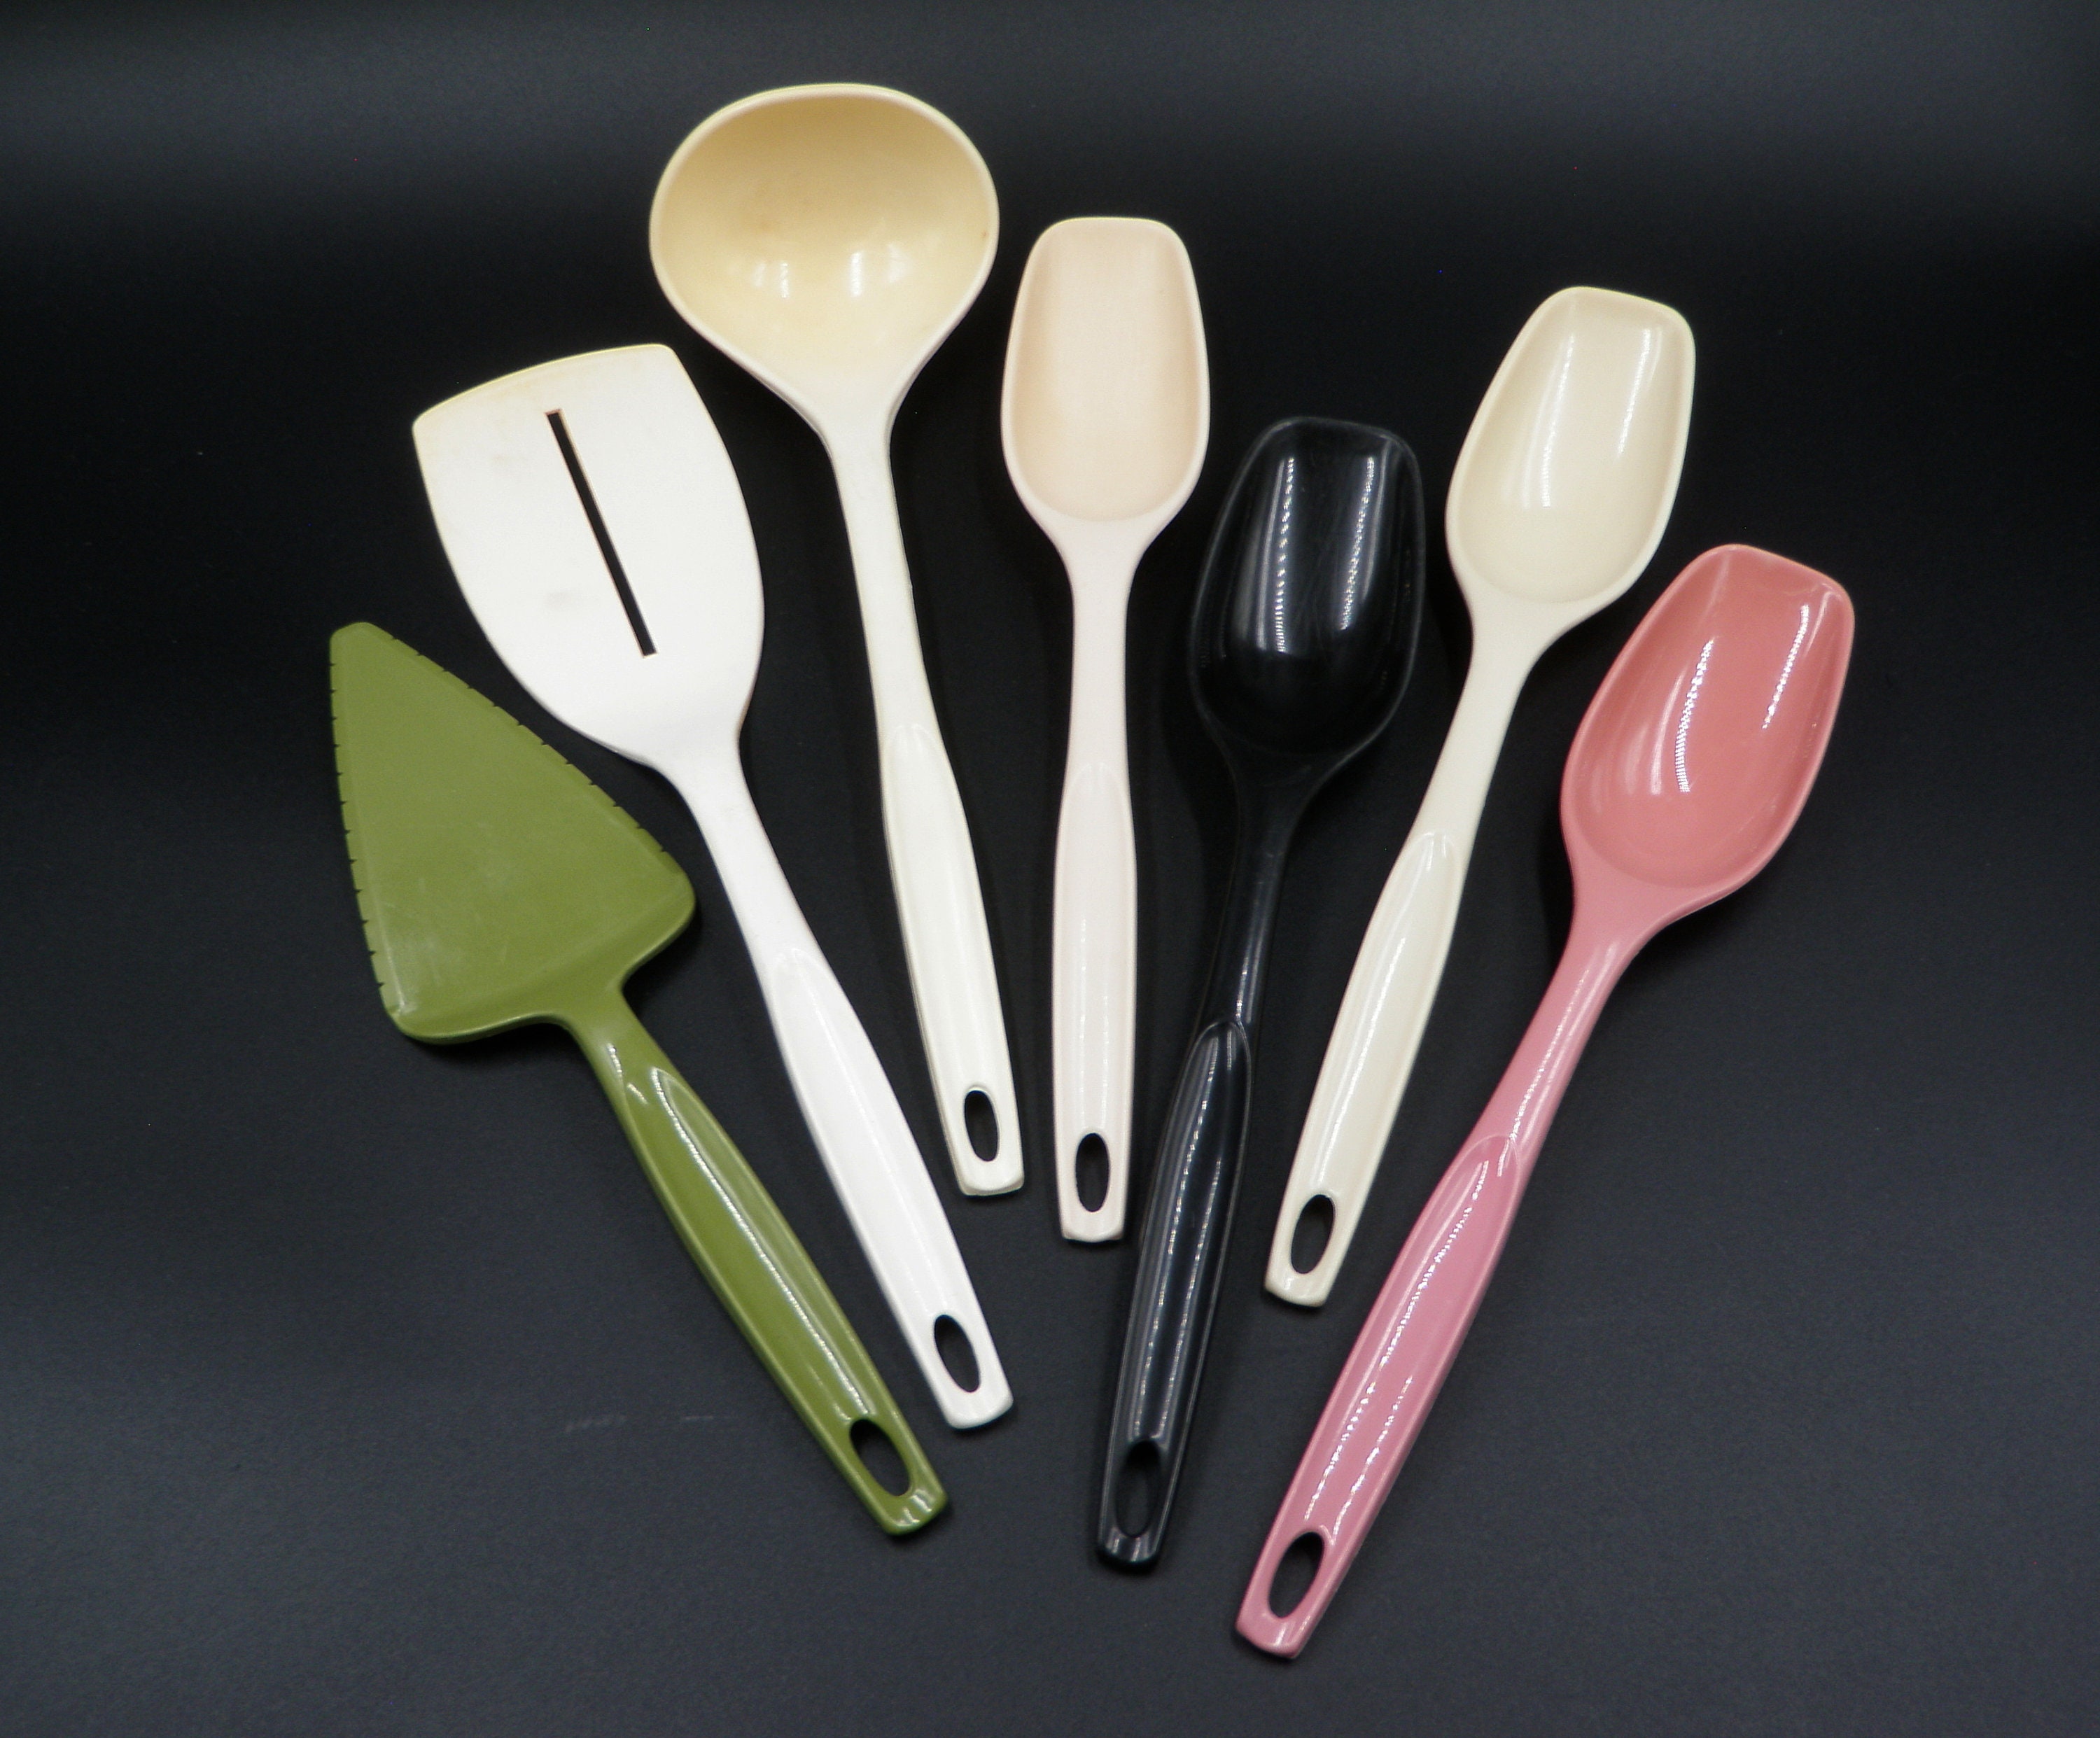 Silicone Slotted Angled Fish Turner Spatula Thin Slotted Egg Spatula  -Heat-Resistant 600F No-Melt Blade/Rubber Handle - Spatula for Cooking or  Baking 